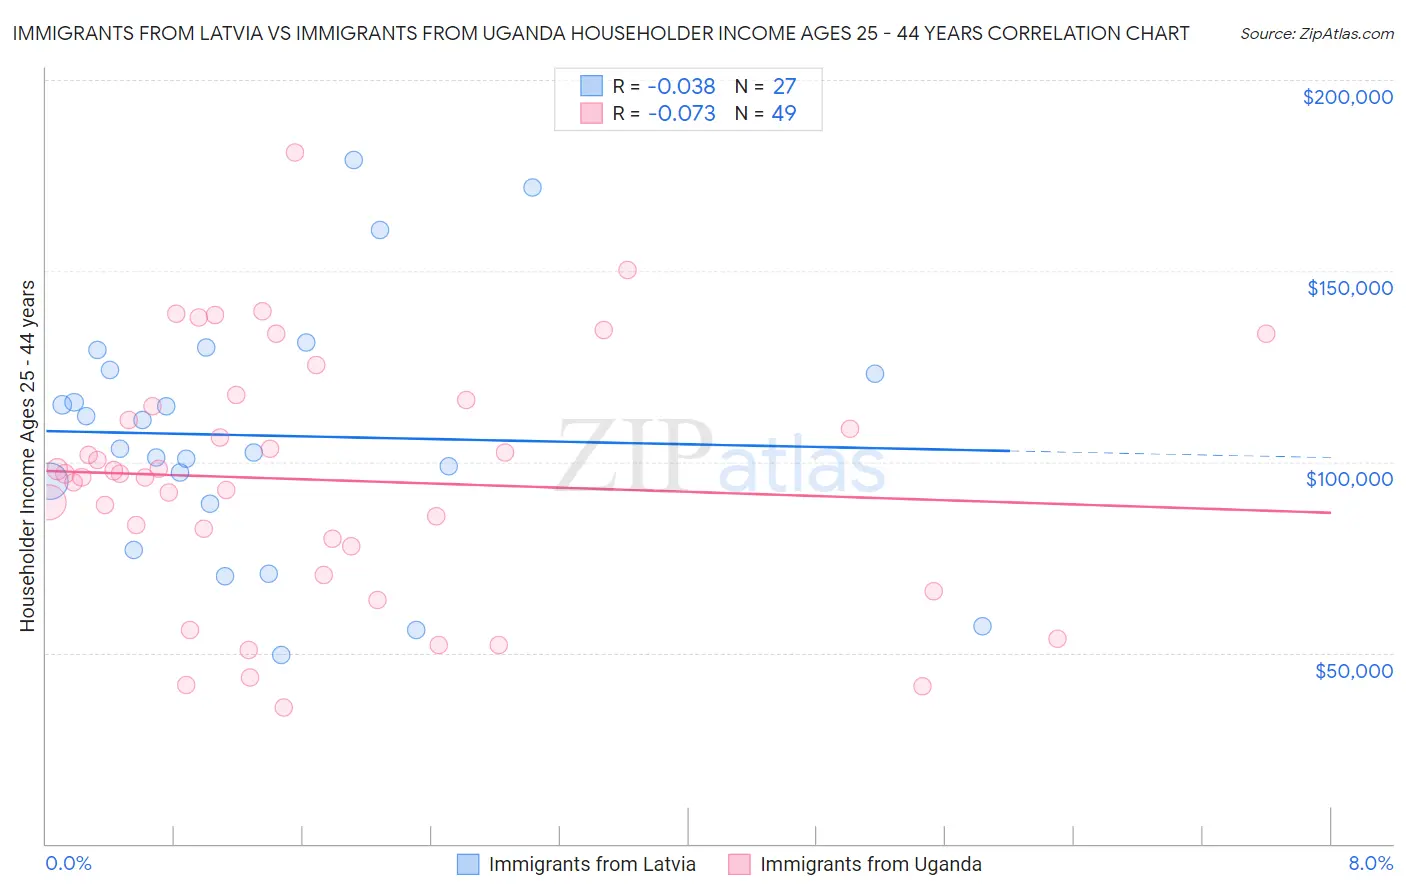 Immigrants from Latvia vs Immigrants from Uganda Householder Income Ages 25 - 44 years